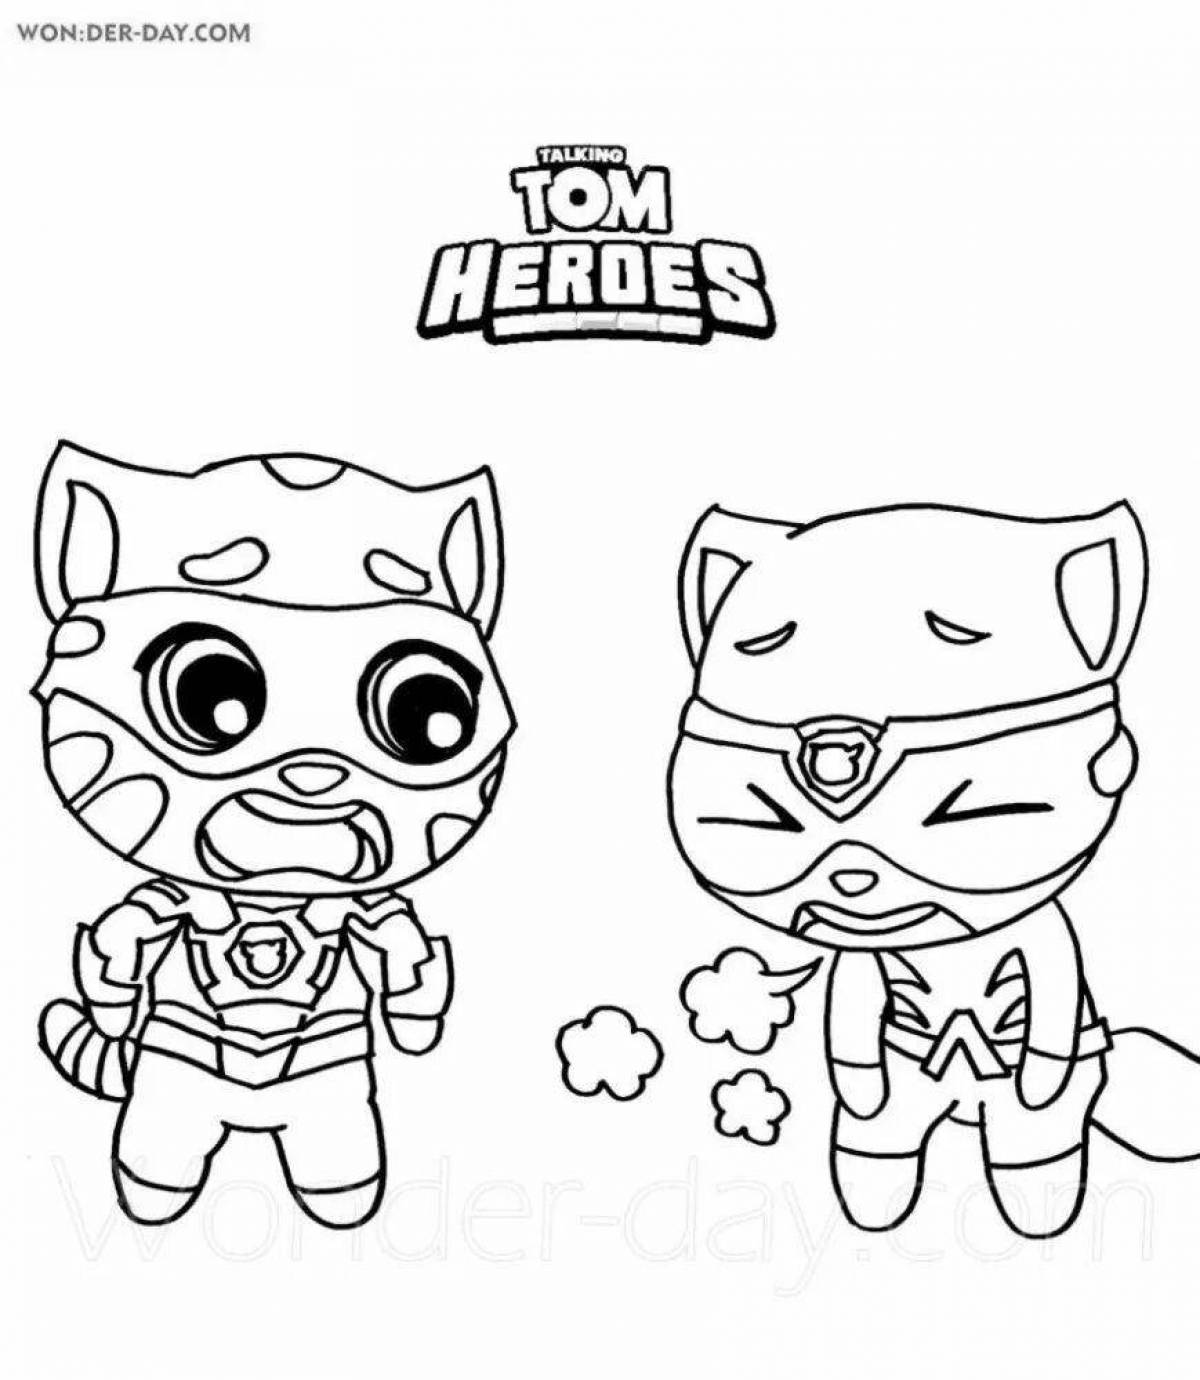 Coloring page of tom chase characters